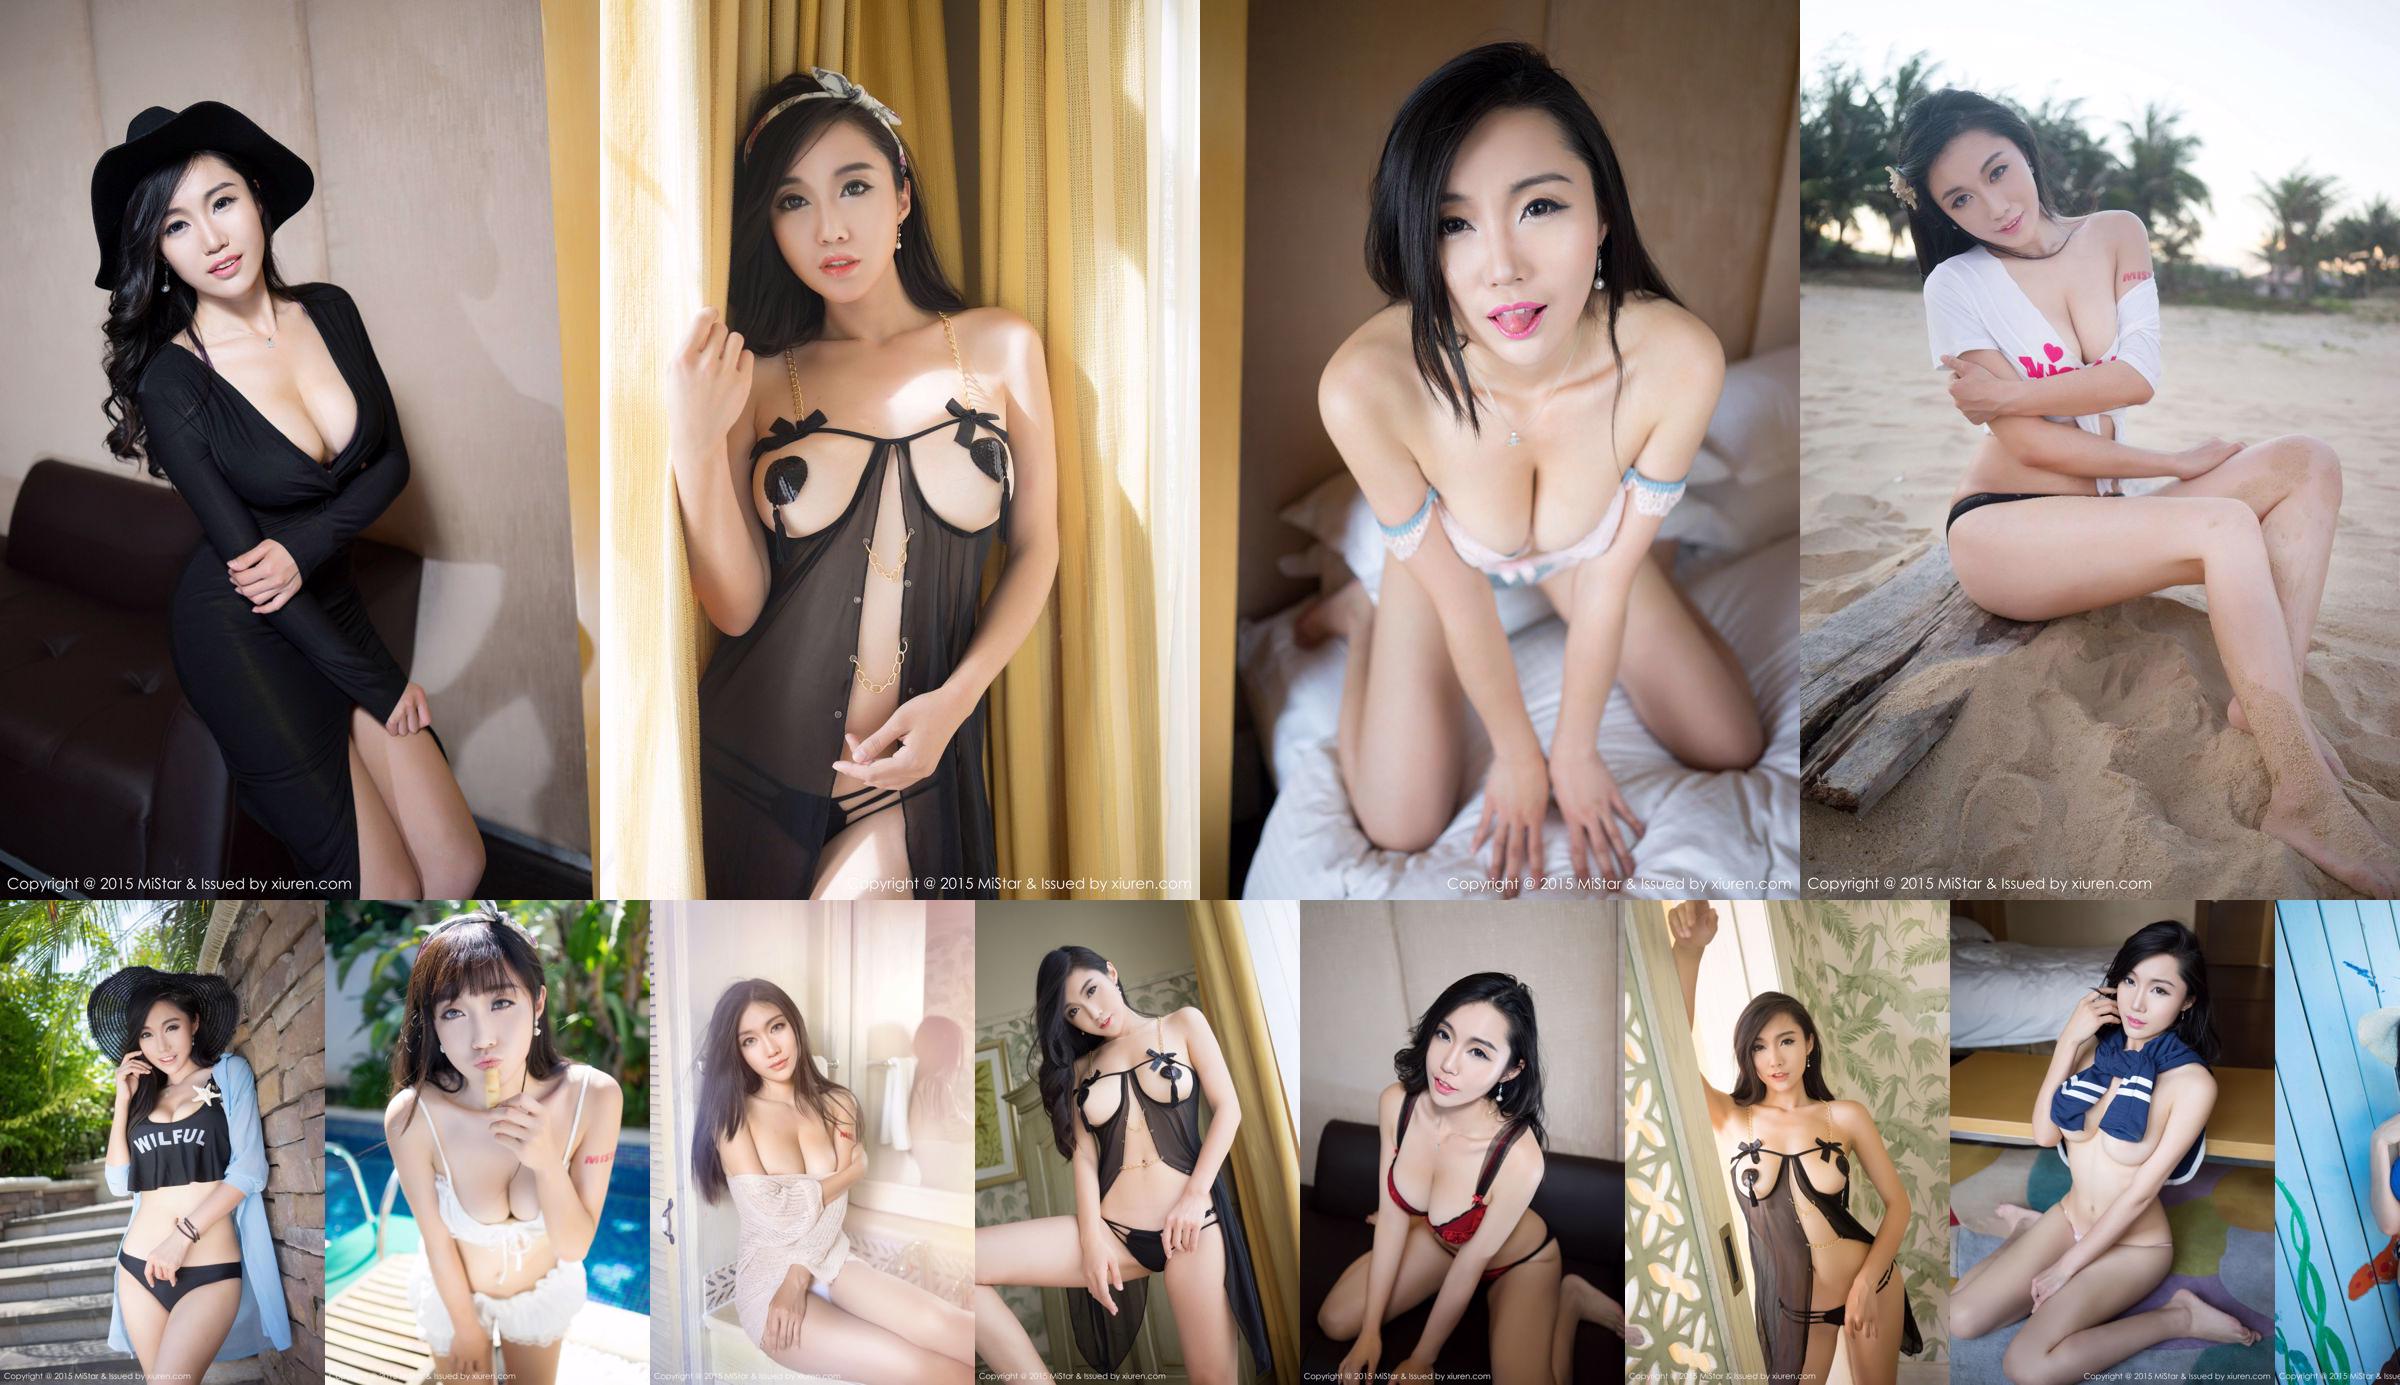 Bling "Sexy Nightwear + High Chase Temptation" [Youmihui YouMi] Vol.032 No.a55956 หน้า 1